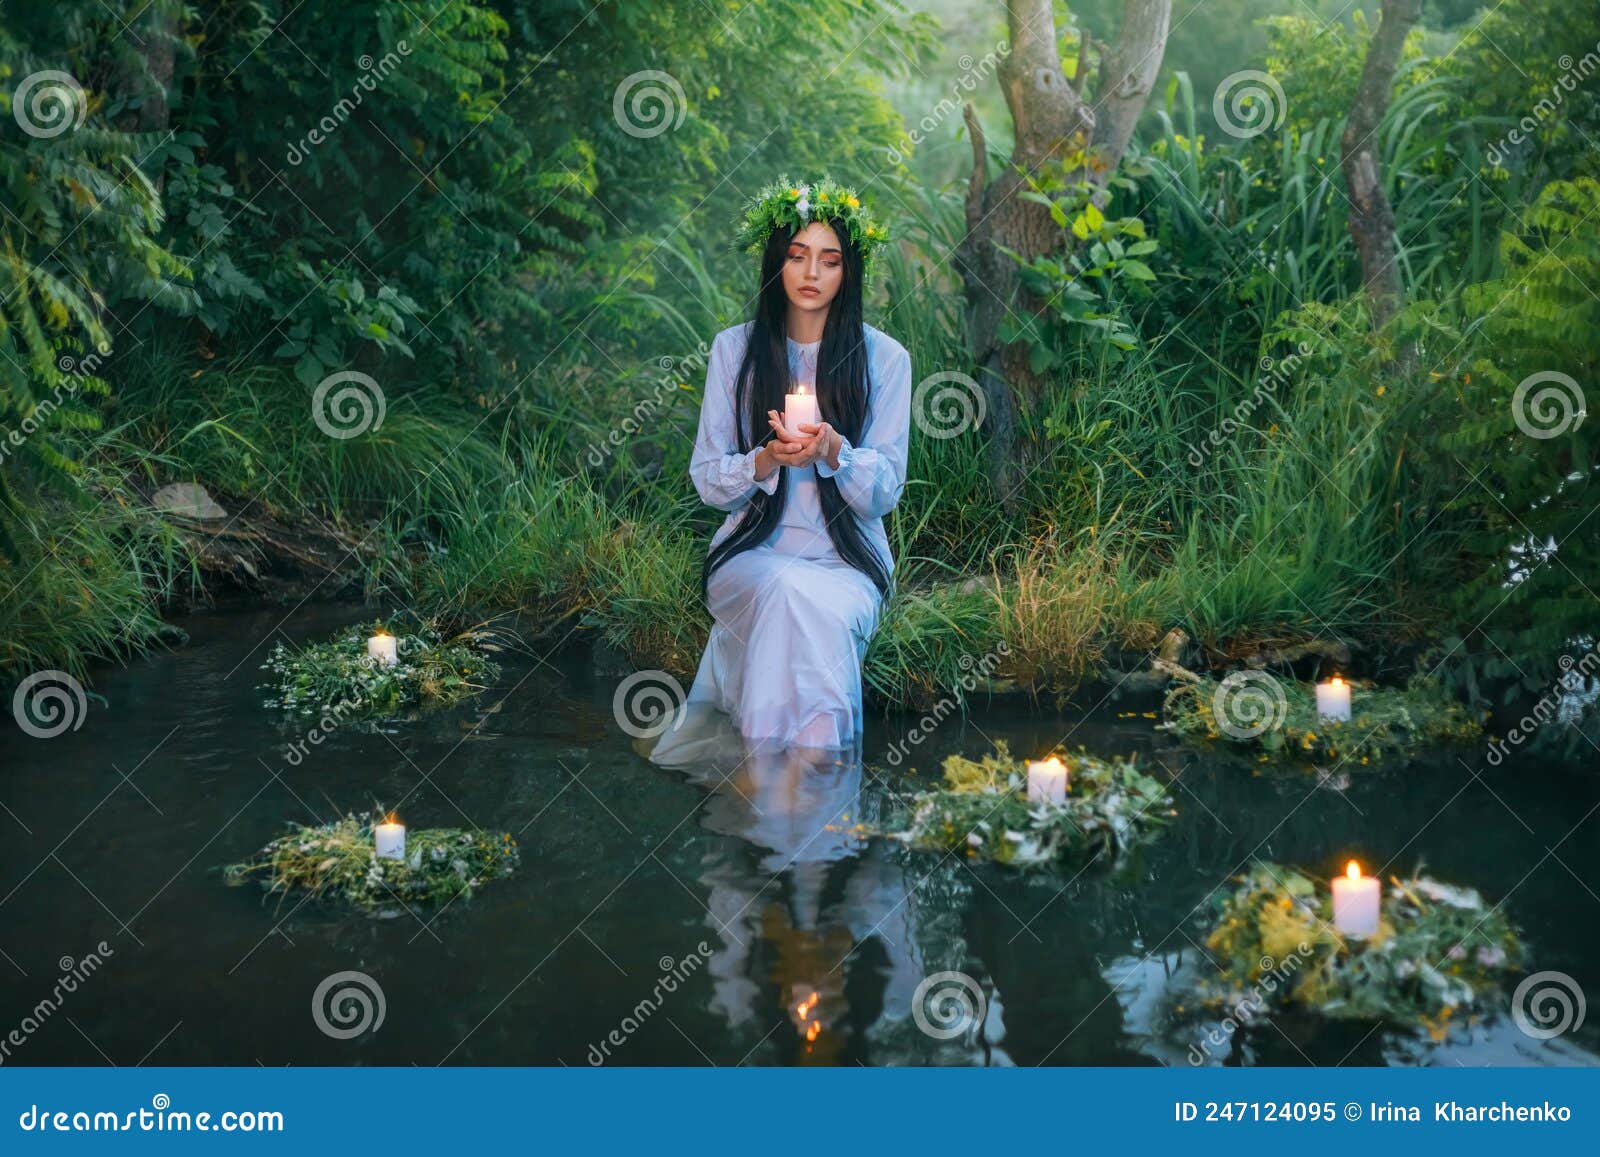 fantasy pagan witch slavic woman holding candle in hand. divination summer tradition. girl mermaid nymph sits on banks